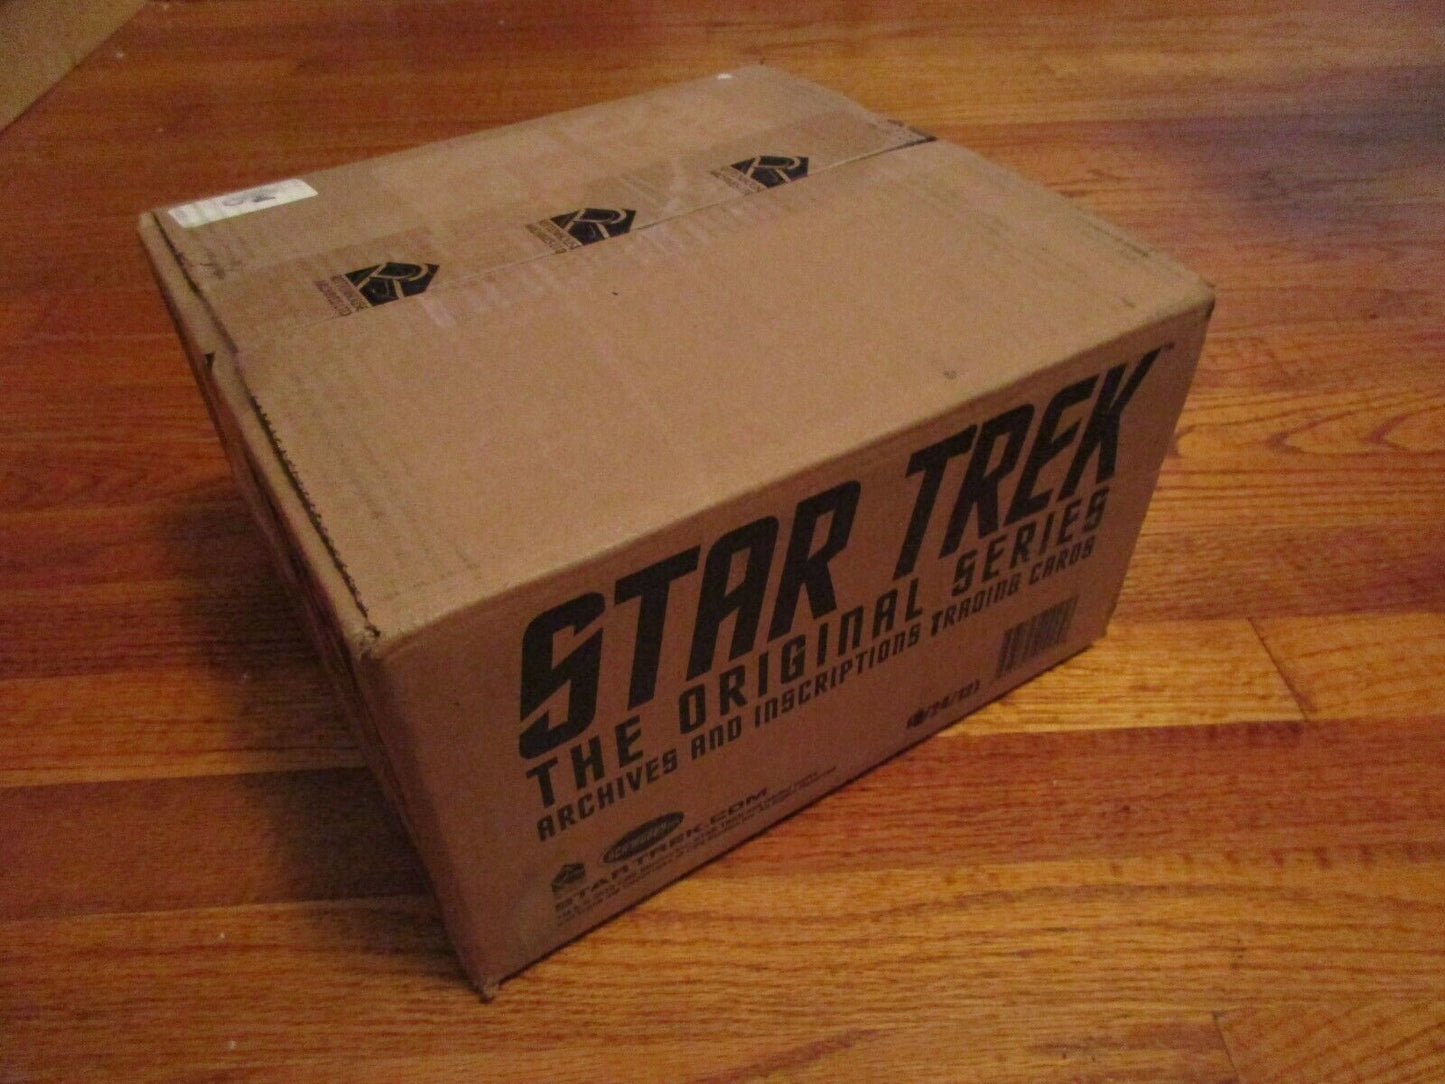 Star Trek TOS Archives & Inscriptions Trading Cards Factory Sealed 12-Box Case (2020 Rittenhouse Archives)